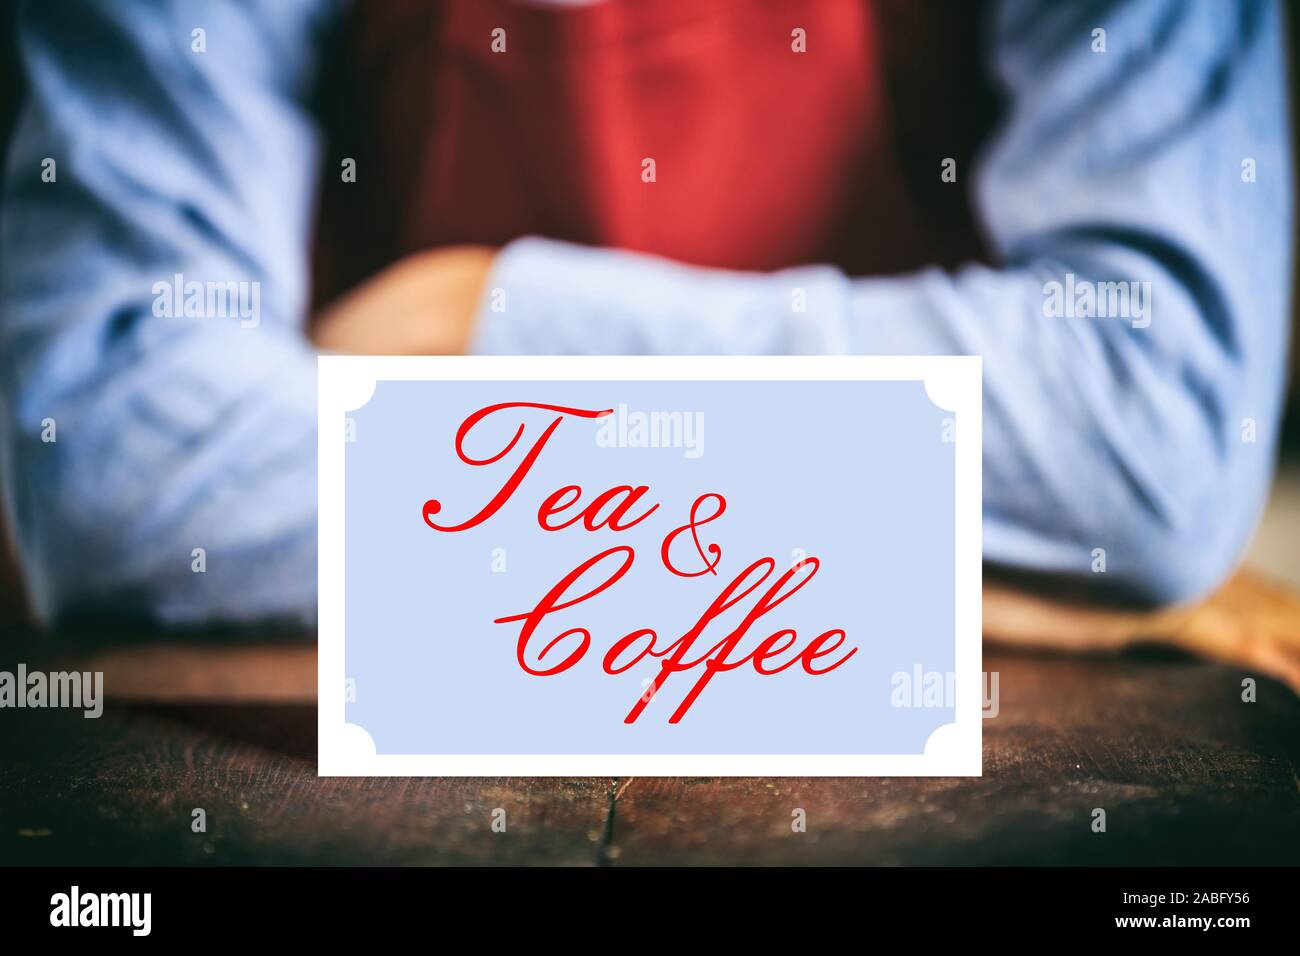 Tea and coffee. Tea & coffee text card sign, blur cafe waiter background. Stock Photo